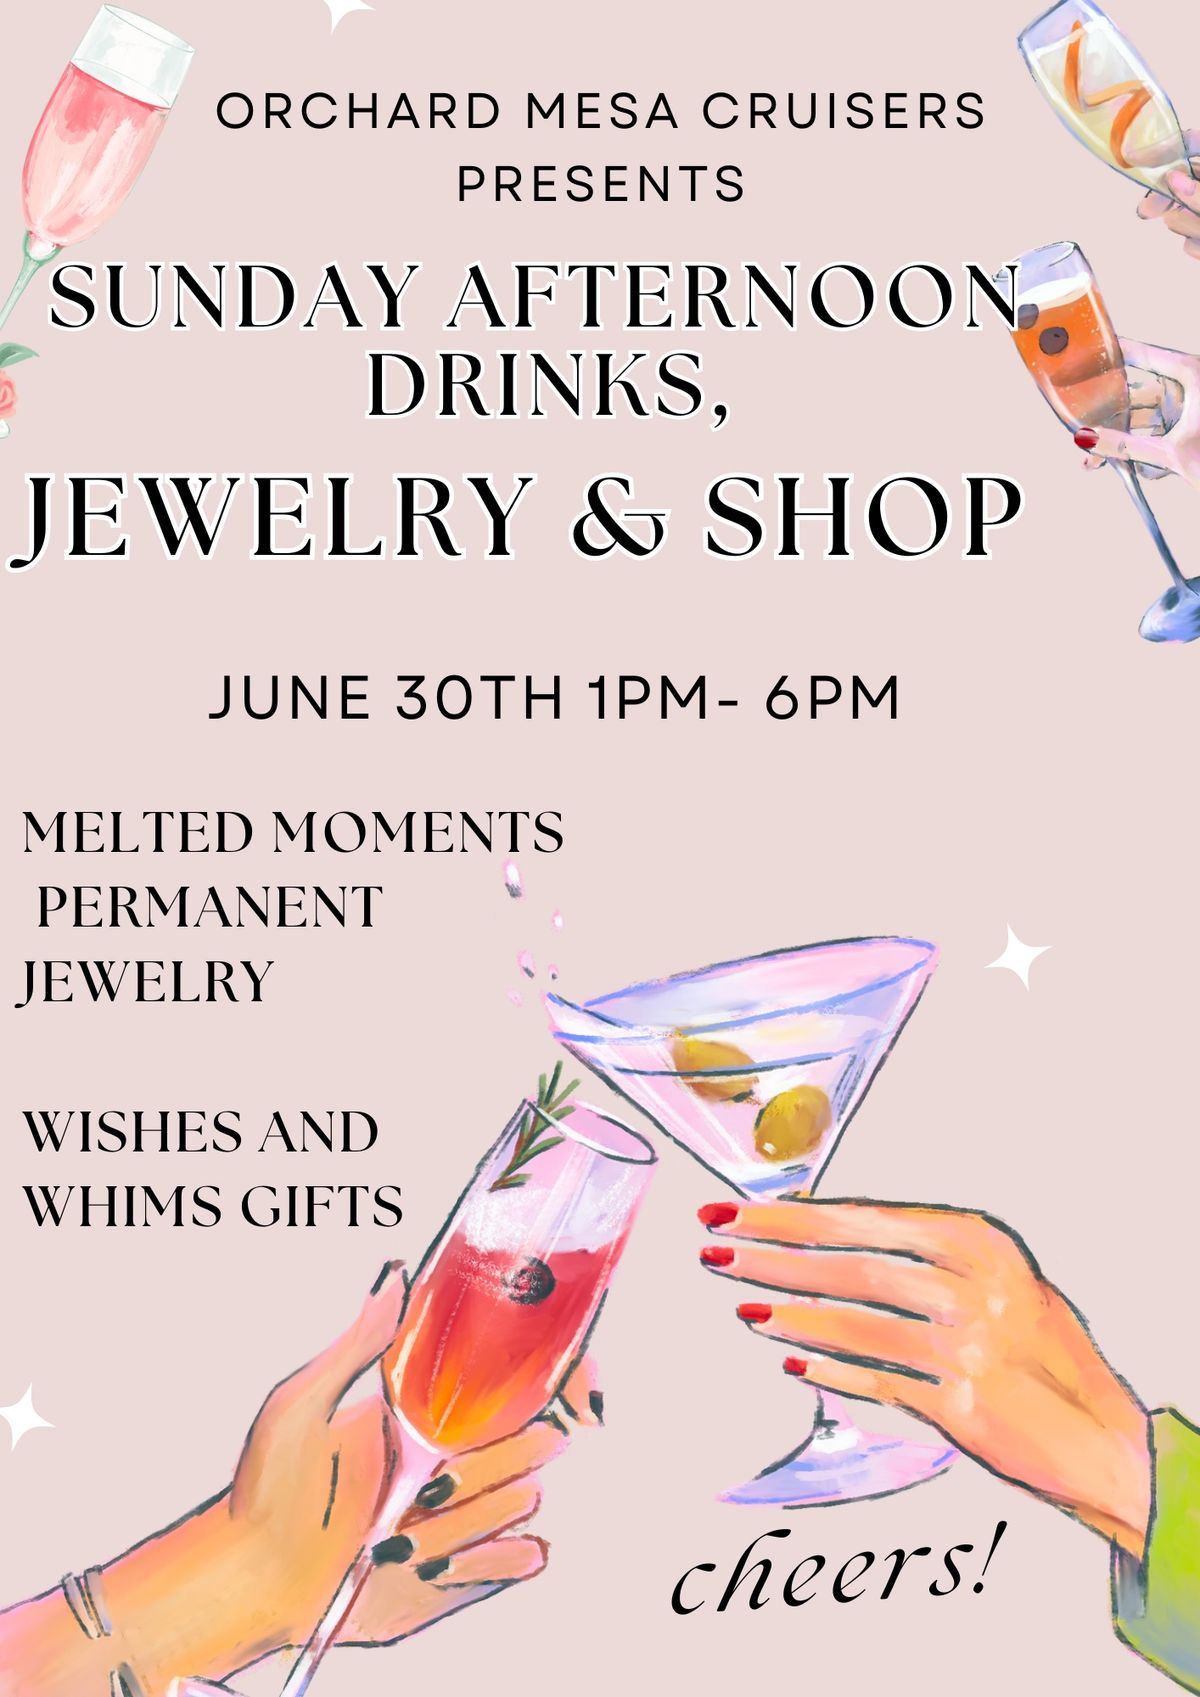 Drinks, Jewelry & Shop @ Orchard Mesa Cruisers